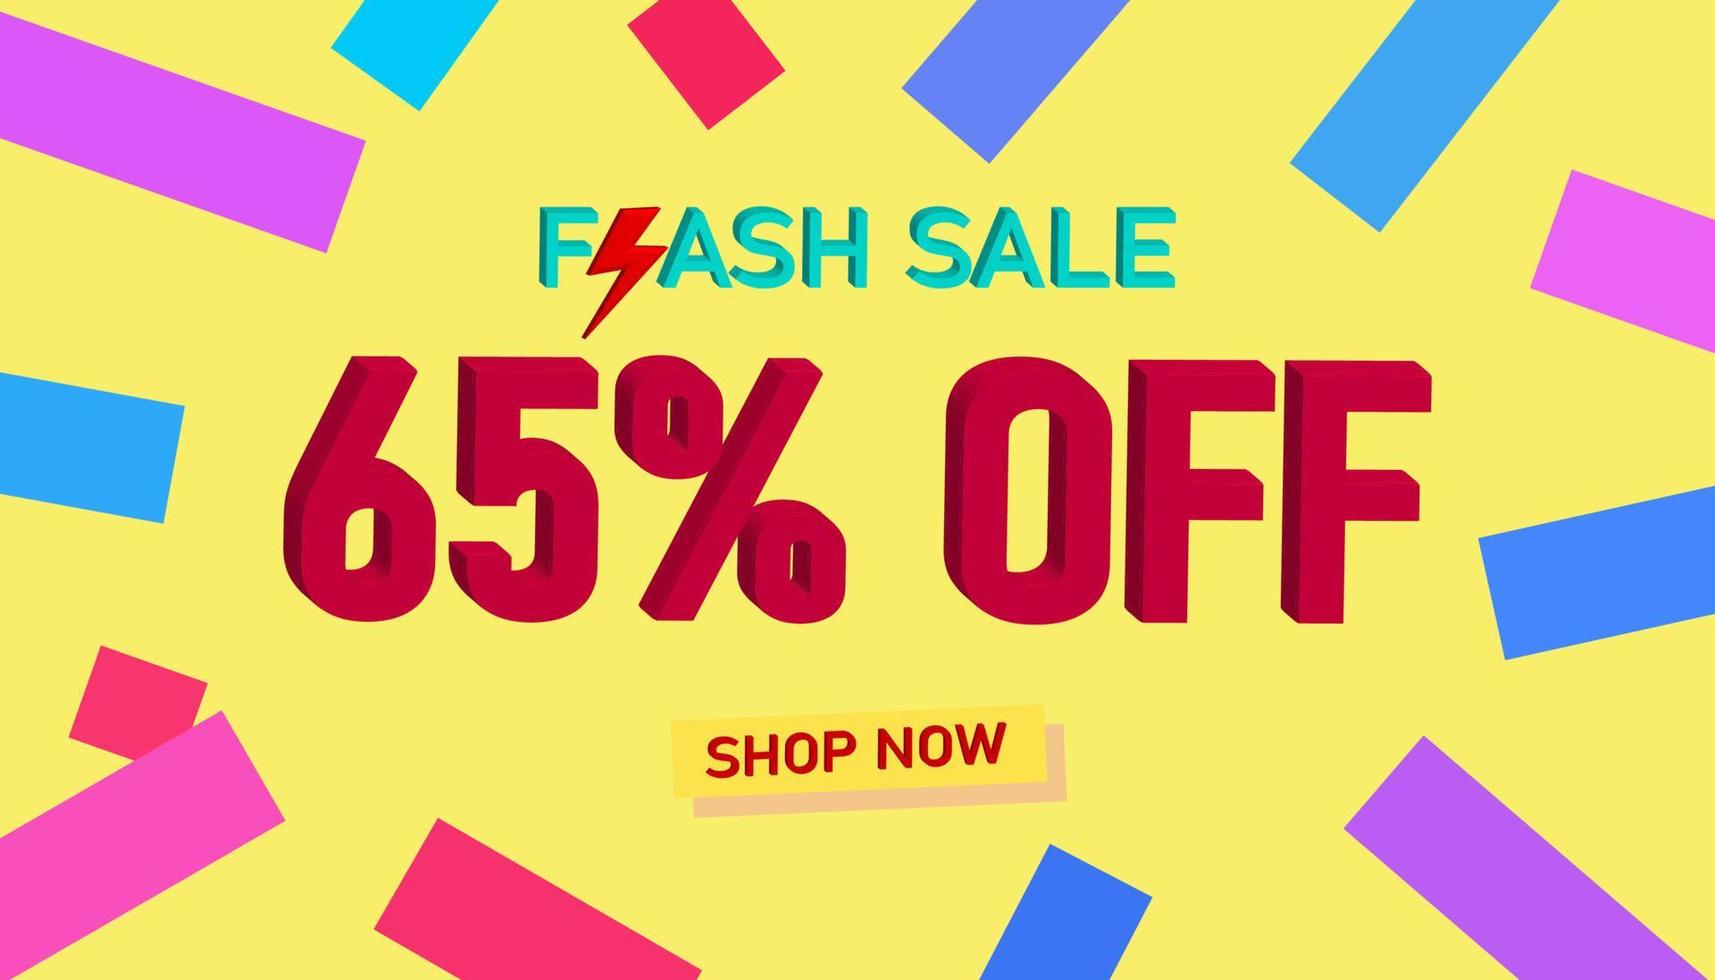 Sales poster or banner with 3D text on yellow background, Flash Sales banner template design for social media and website. Special Offer Flash Sale campaigns or promotions. vector